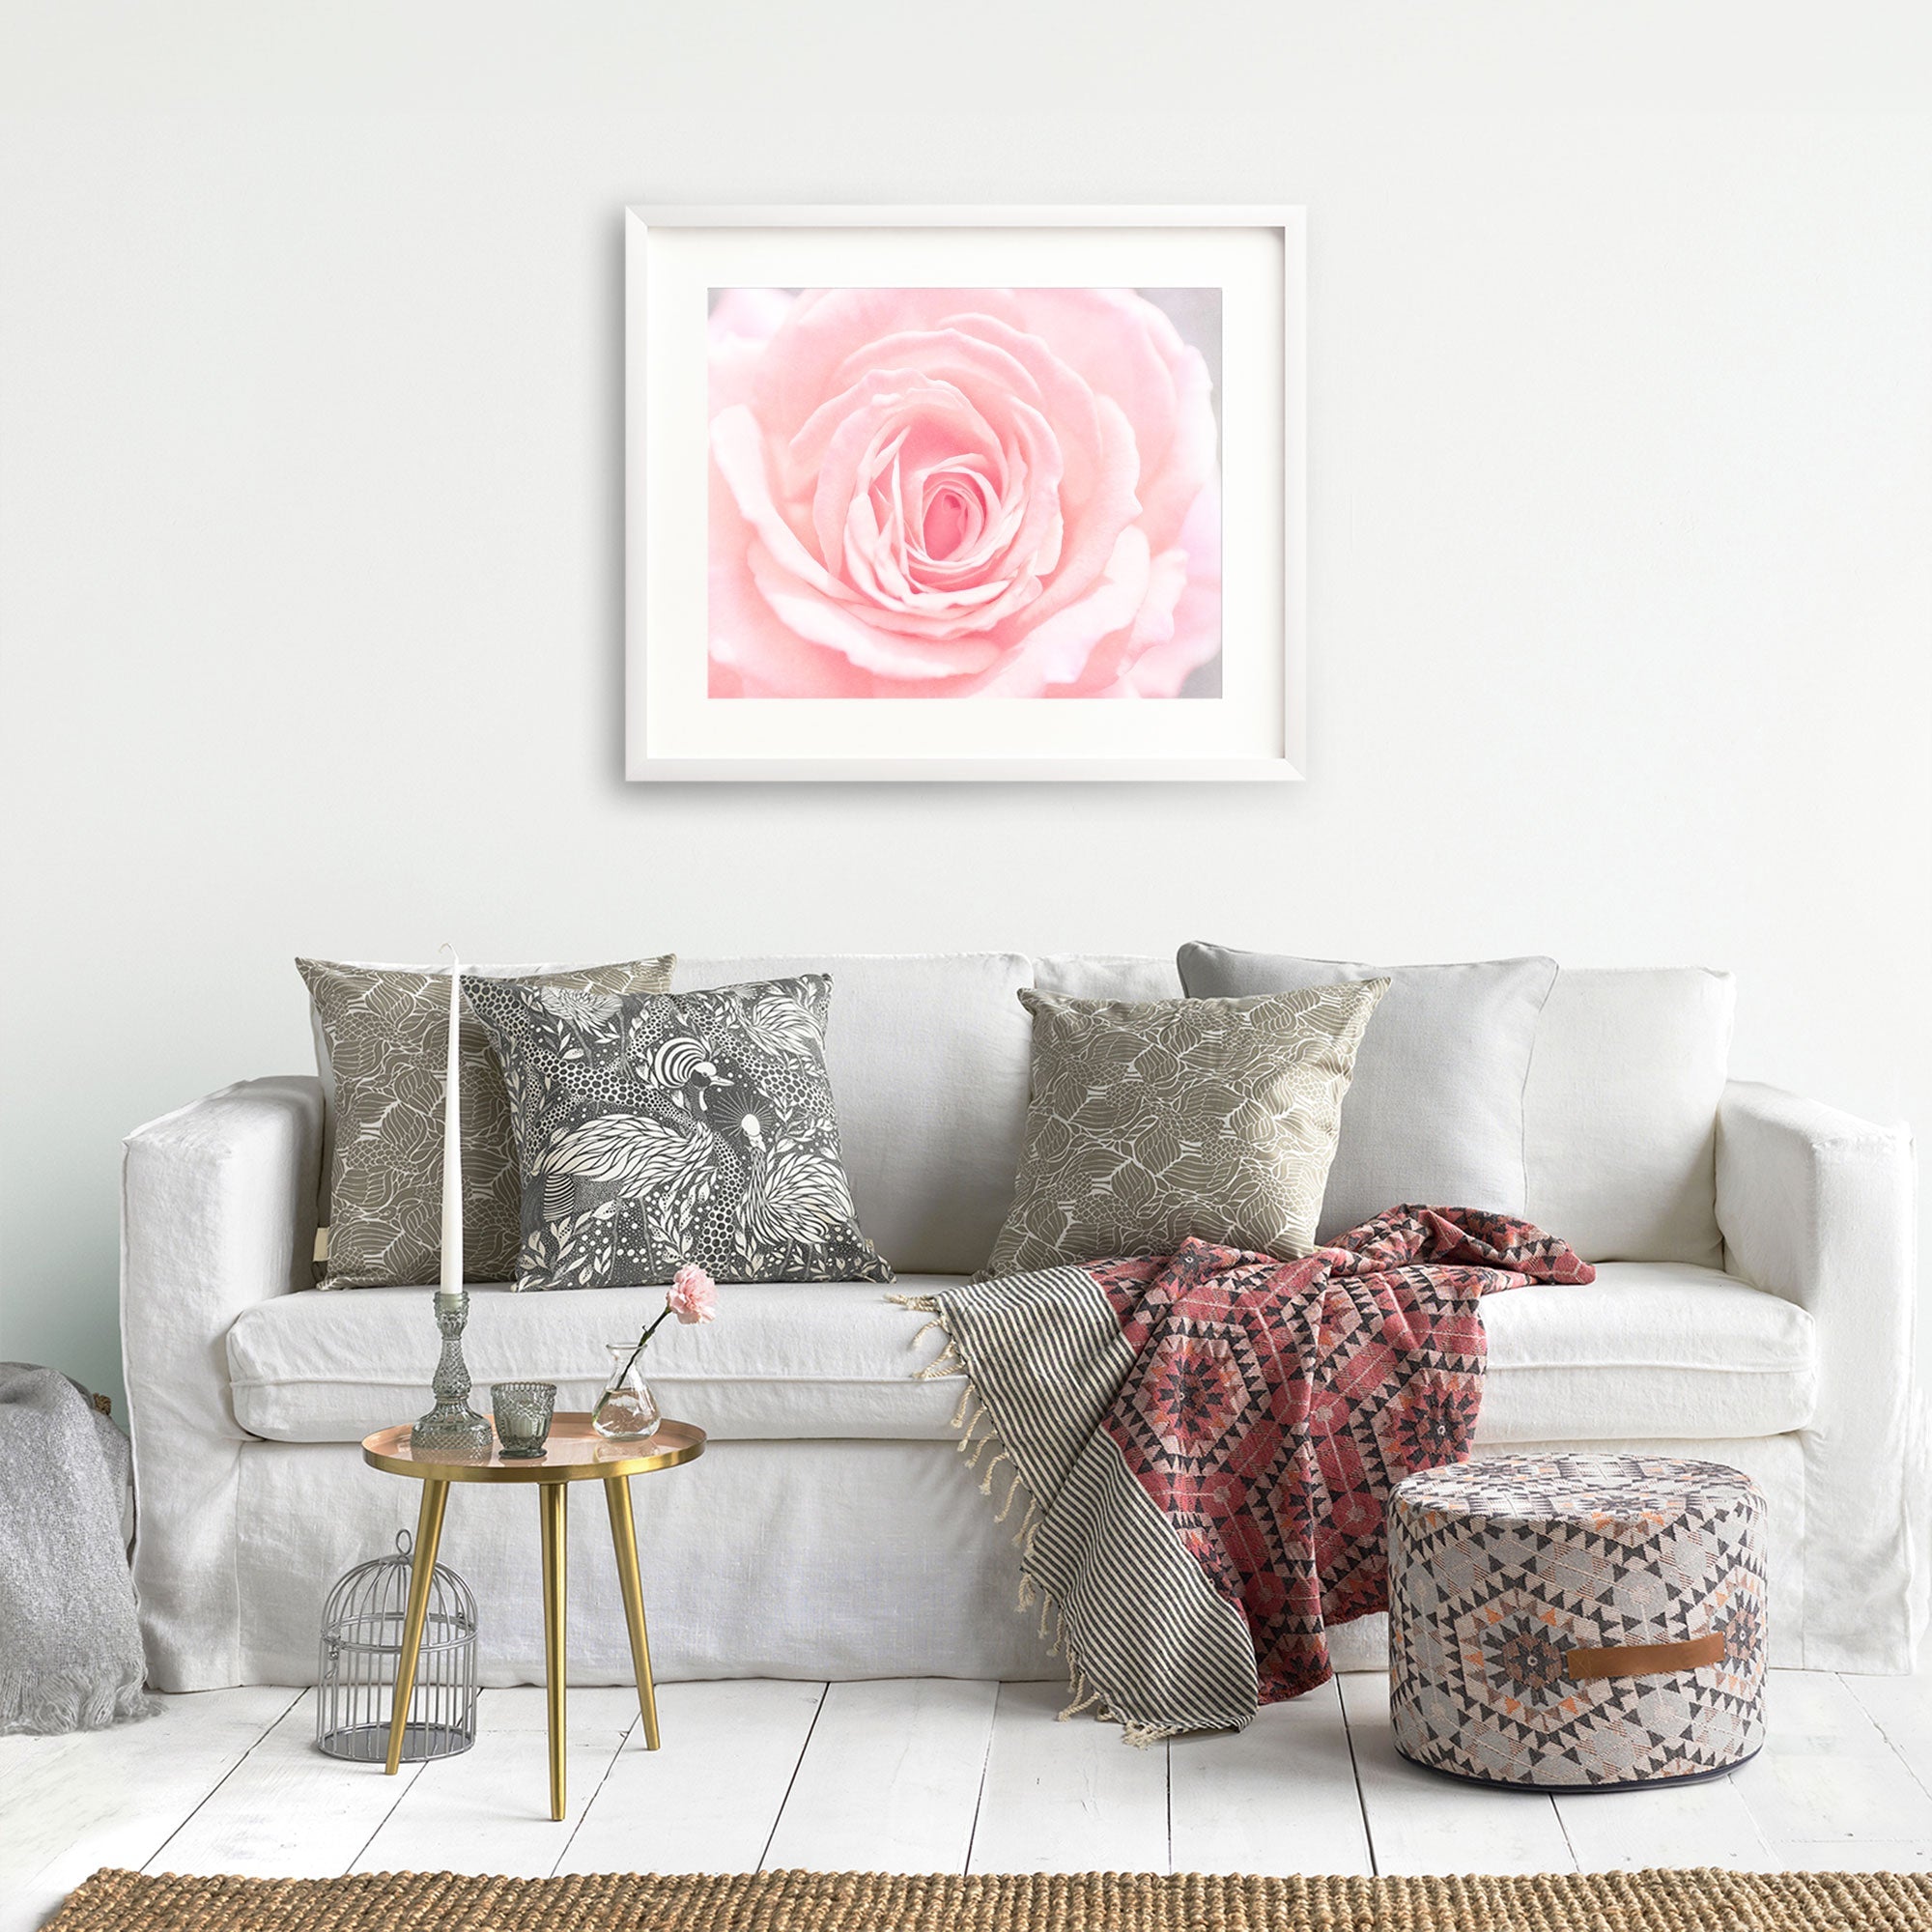 A cozy living room with a white sofa adorned with &#39;Pink Rose Print&#39; cushions from Offley Green, a framed rose in bloom artwork above, a small gold side table, and a stylish ottoman. A red patterned throw is